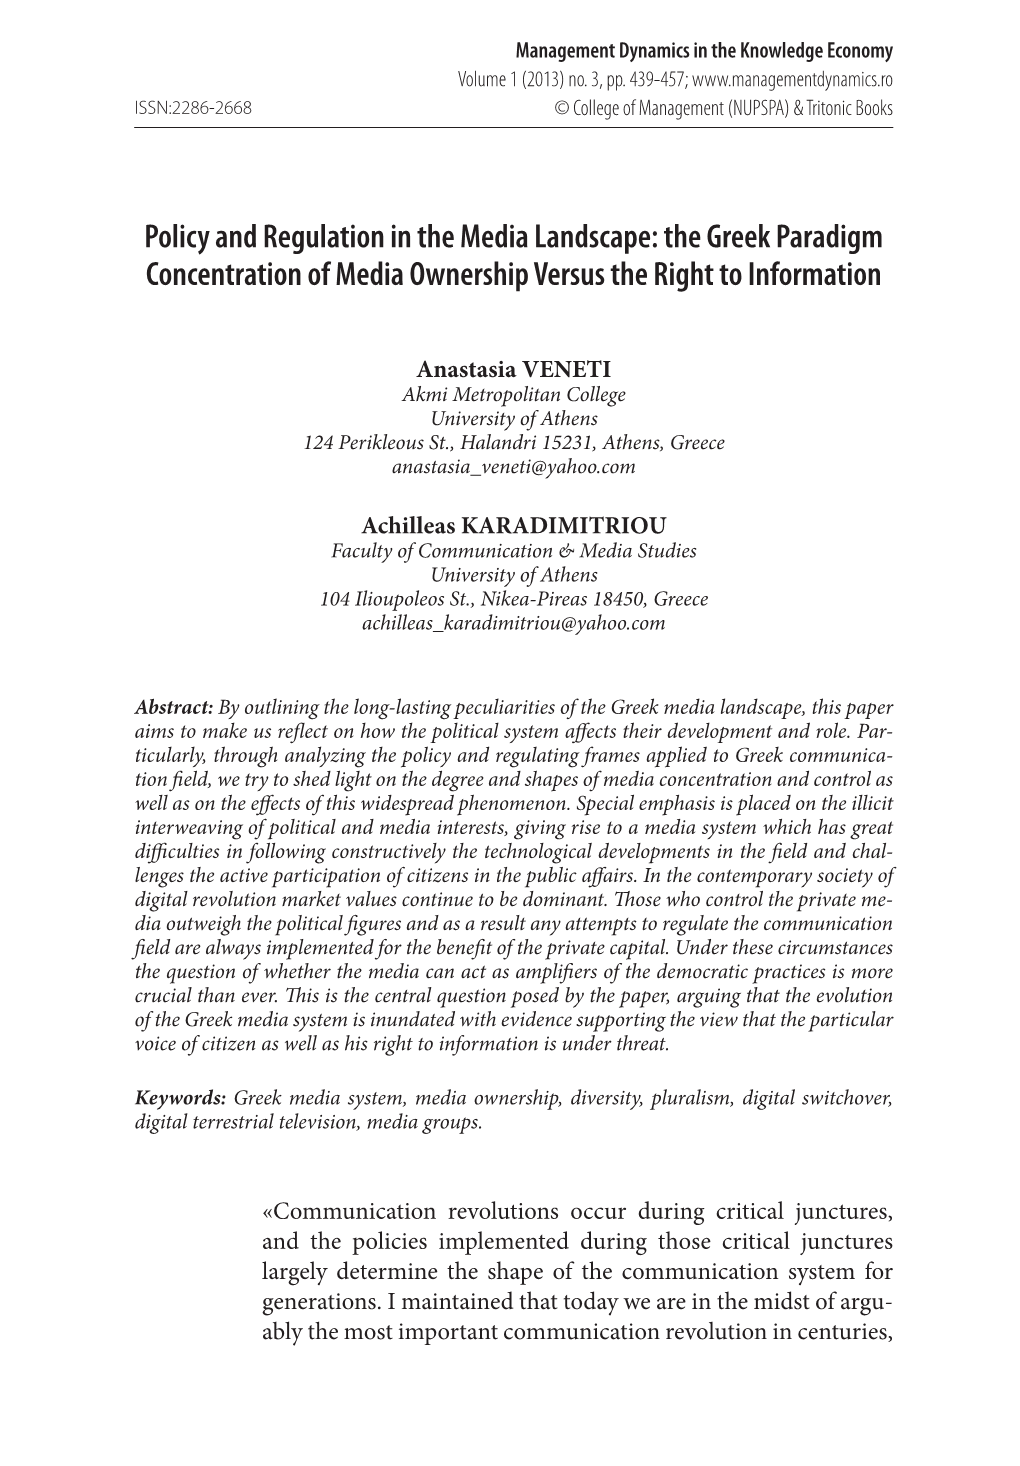 Policy and Regulation in the Media Landscape: the Greek Paradigm Concentration of Media Ownership Versus the Right to Information